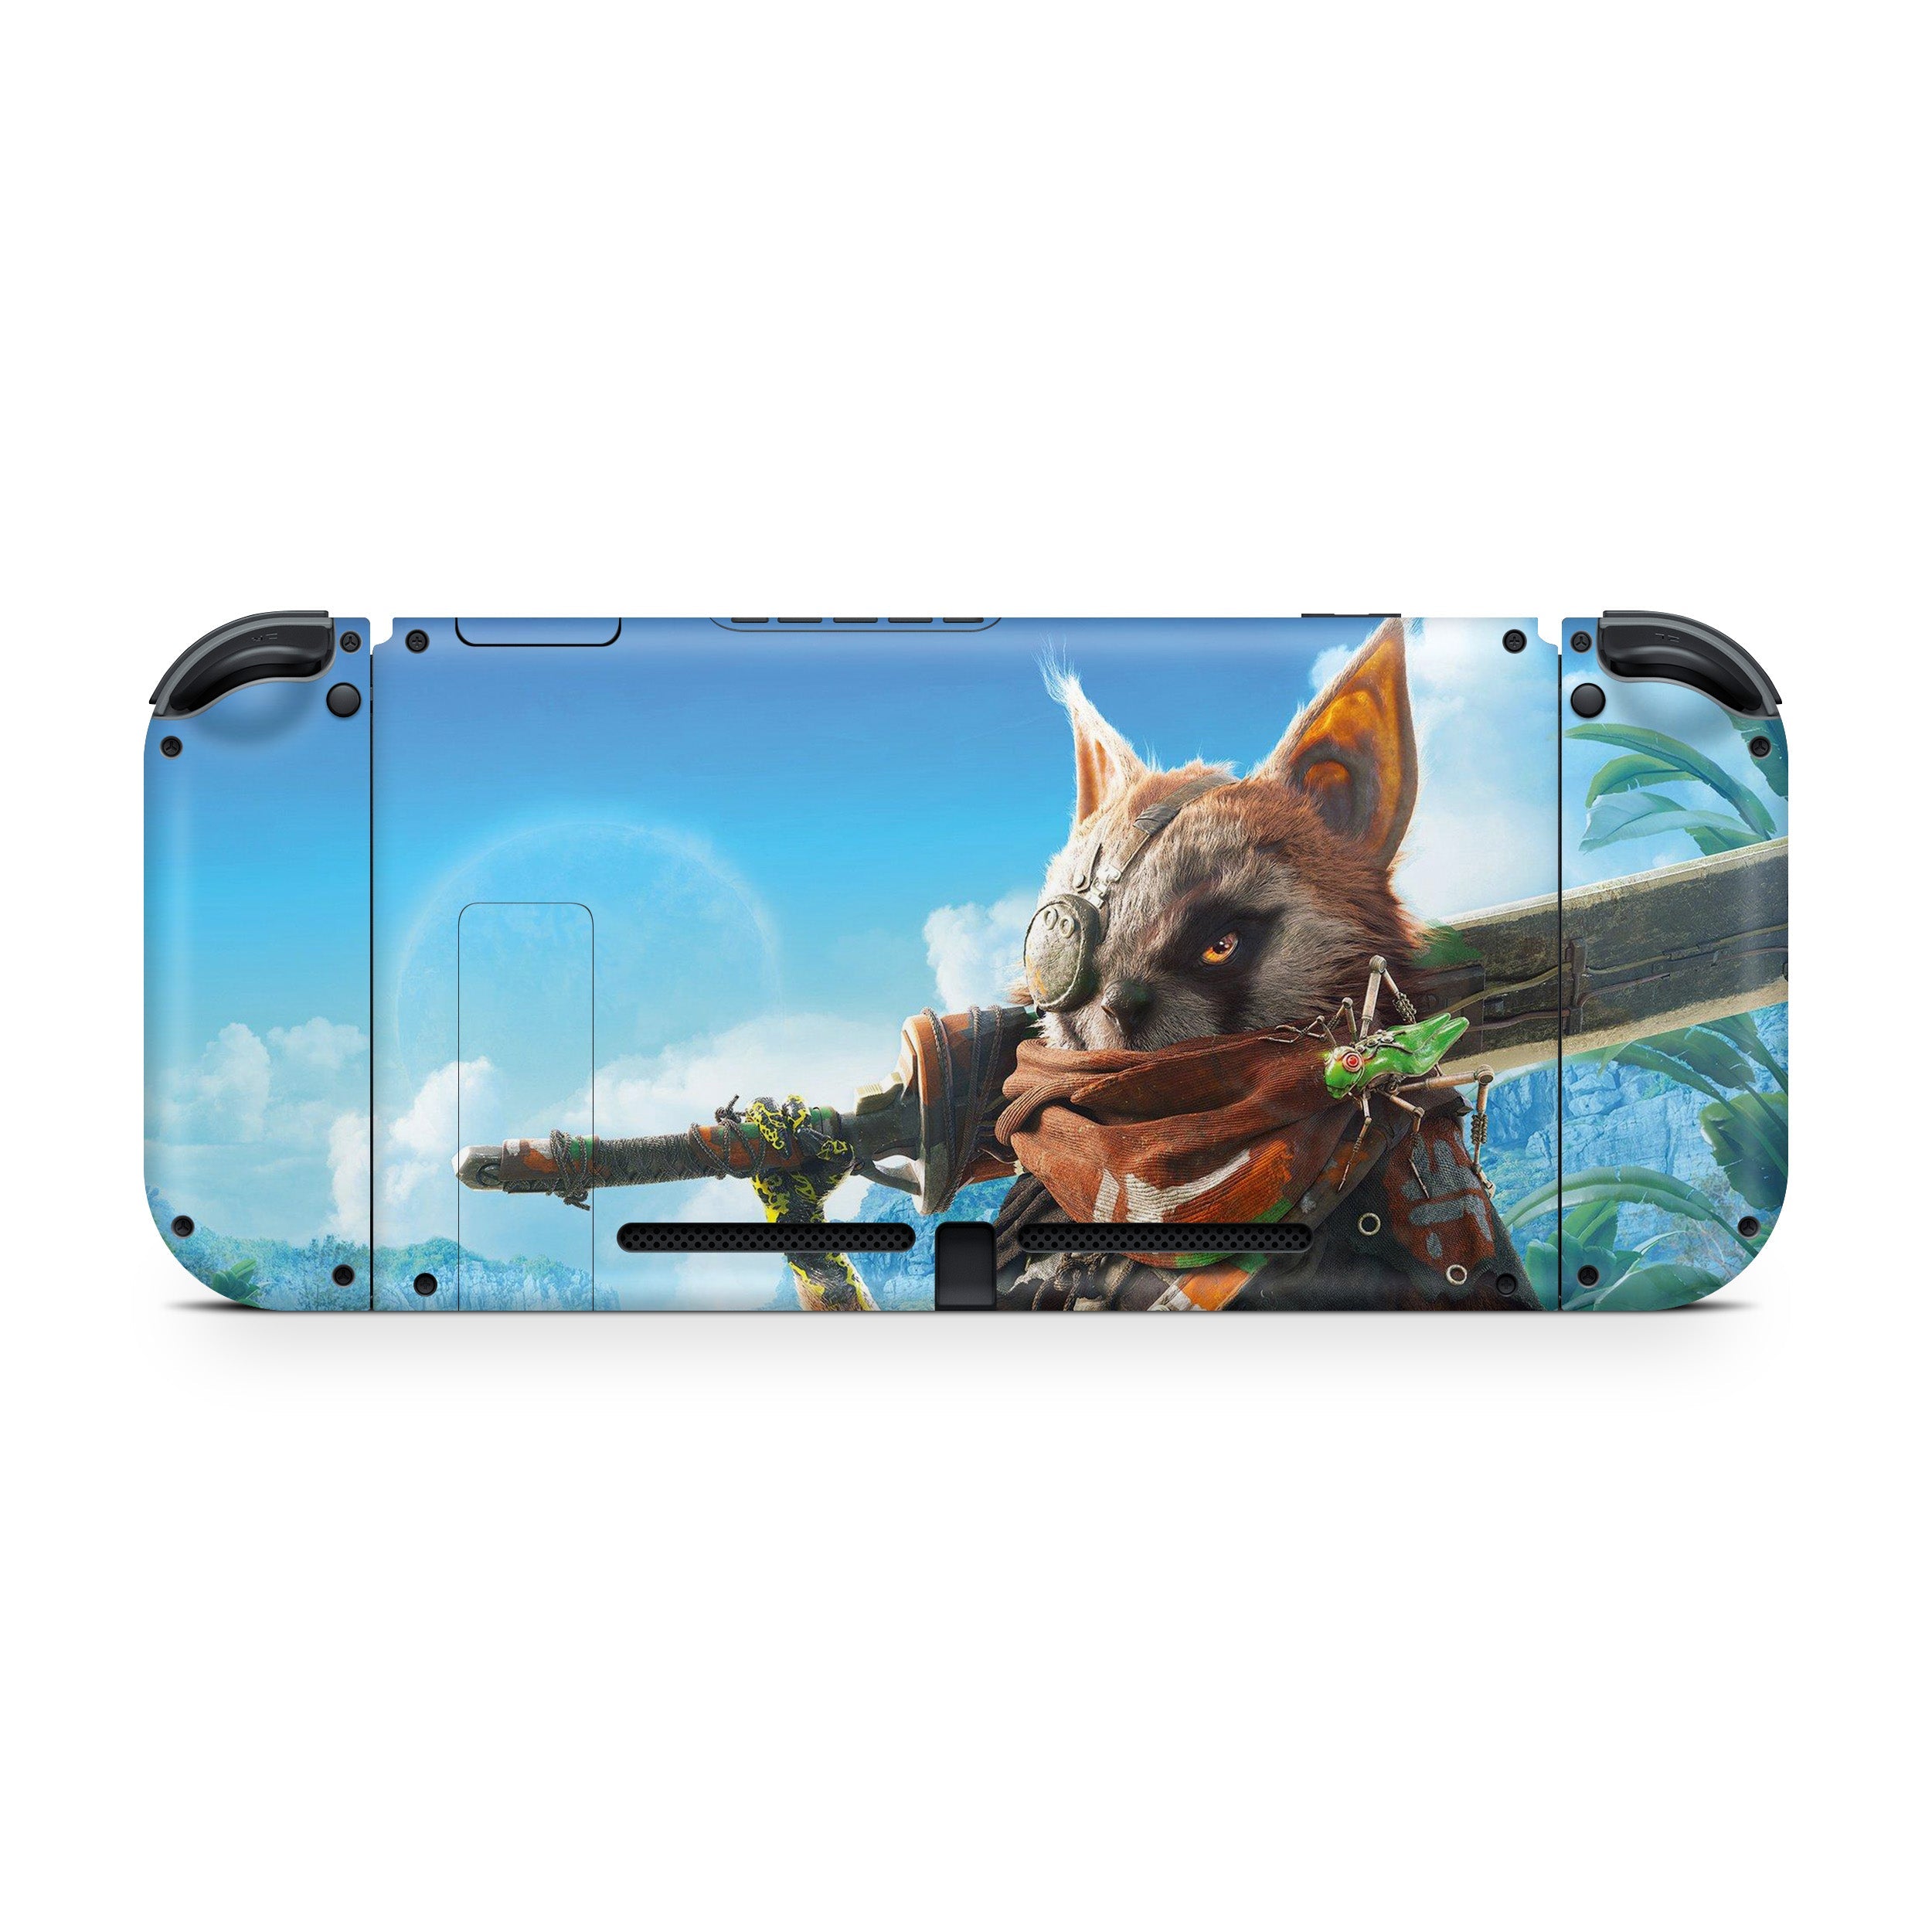 A video game skin featuring a Biomutant design for the Nintendo Switch.